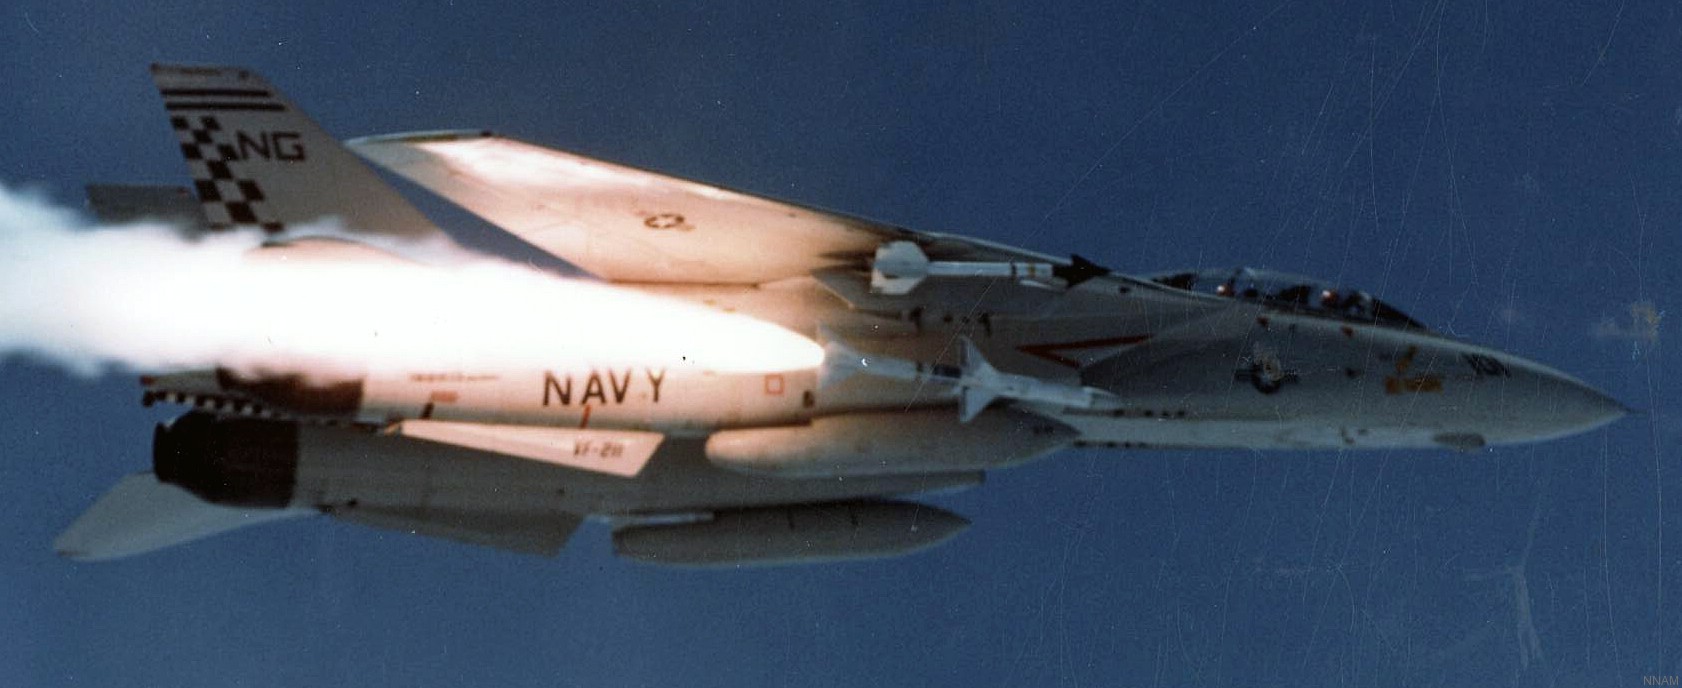 vf-211 fighting checkmates fighter squadron f-14a tomcat us navy carrier air wing aim-7 sparrow missile 27